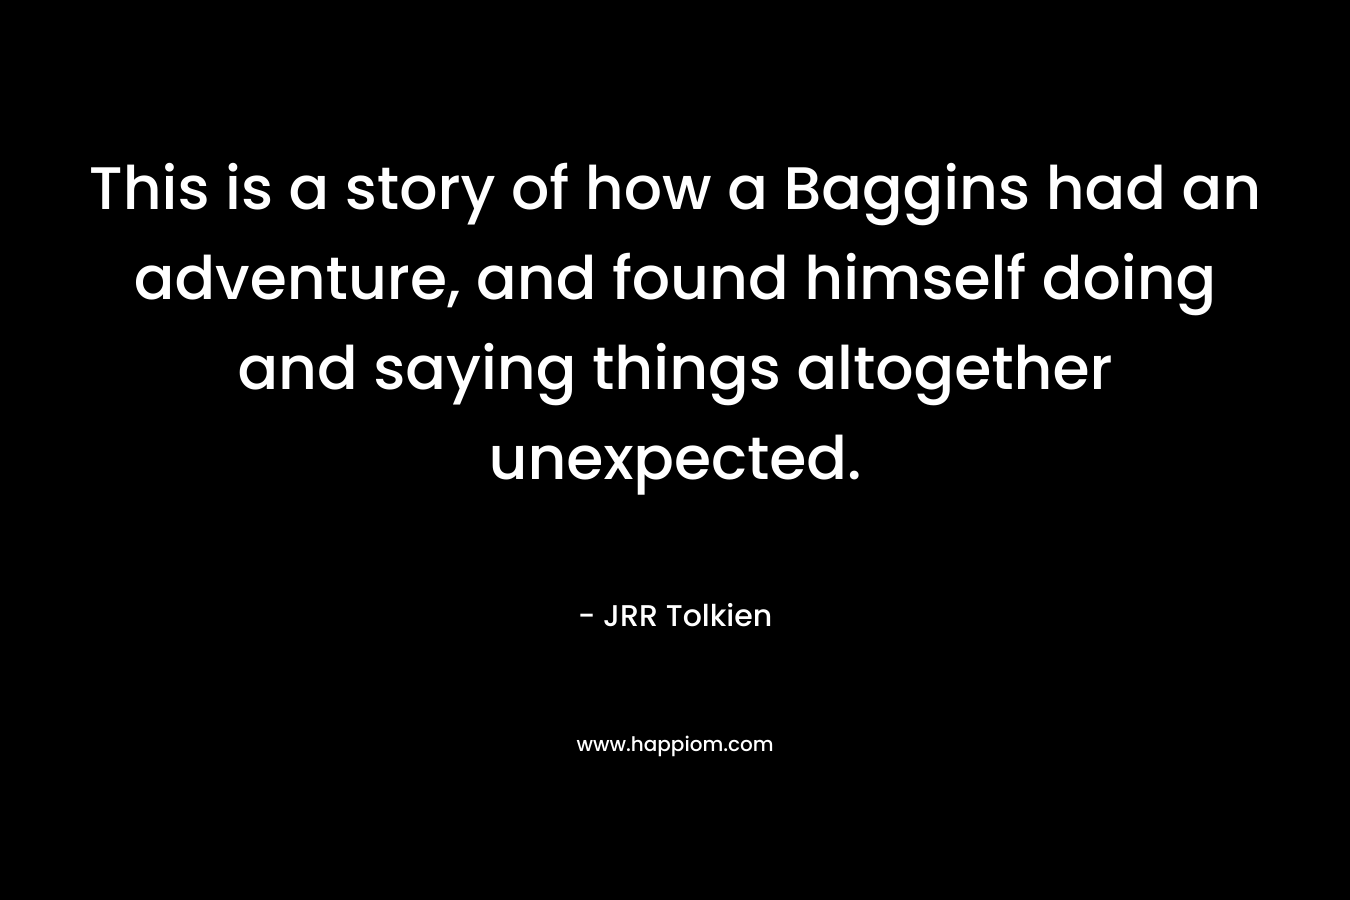 This is a story of how a Baggins had an adventure, and found himself doing and saying things altogether unexpected. – JRR Tolkien